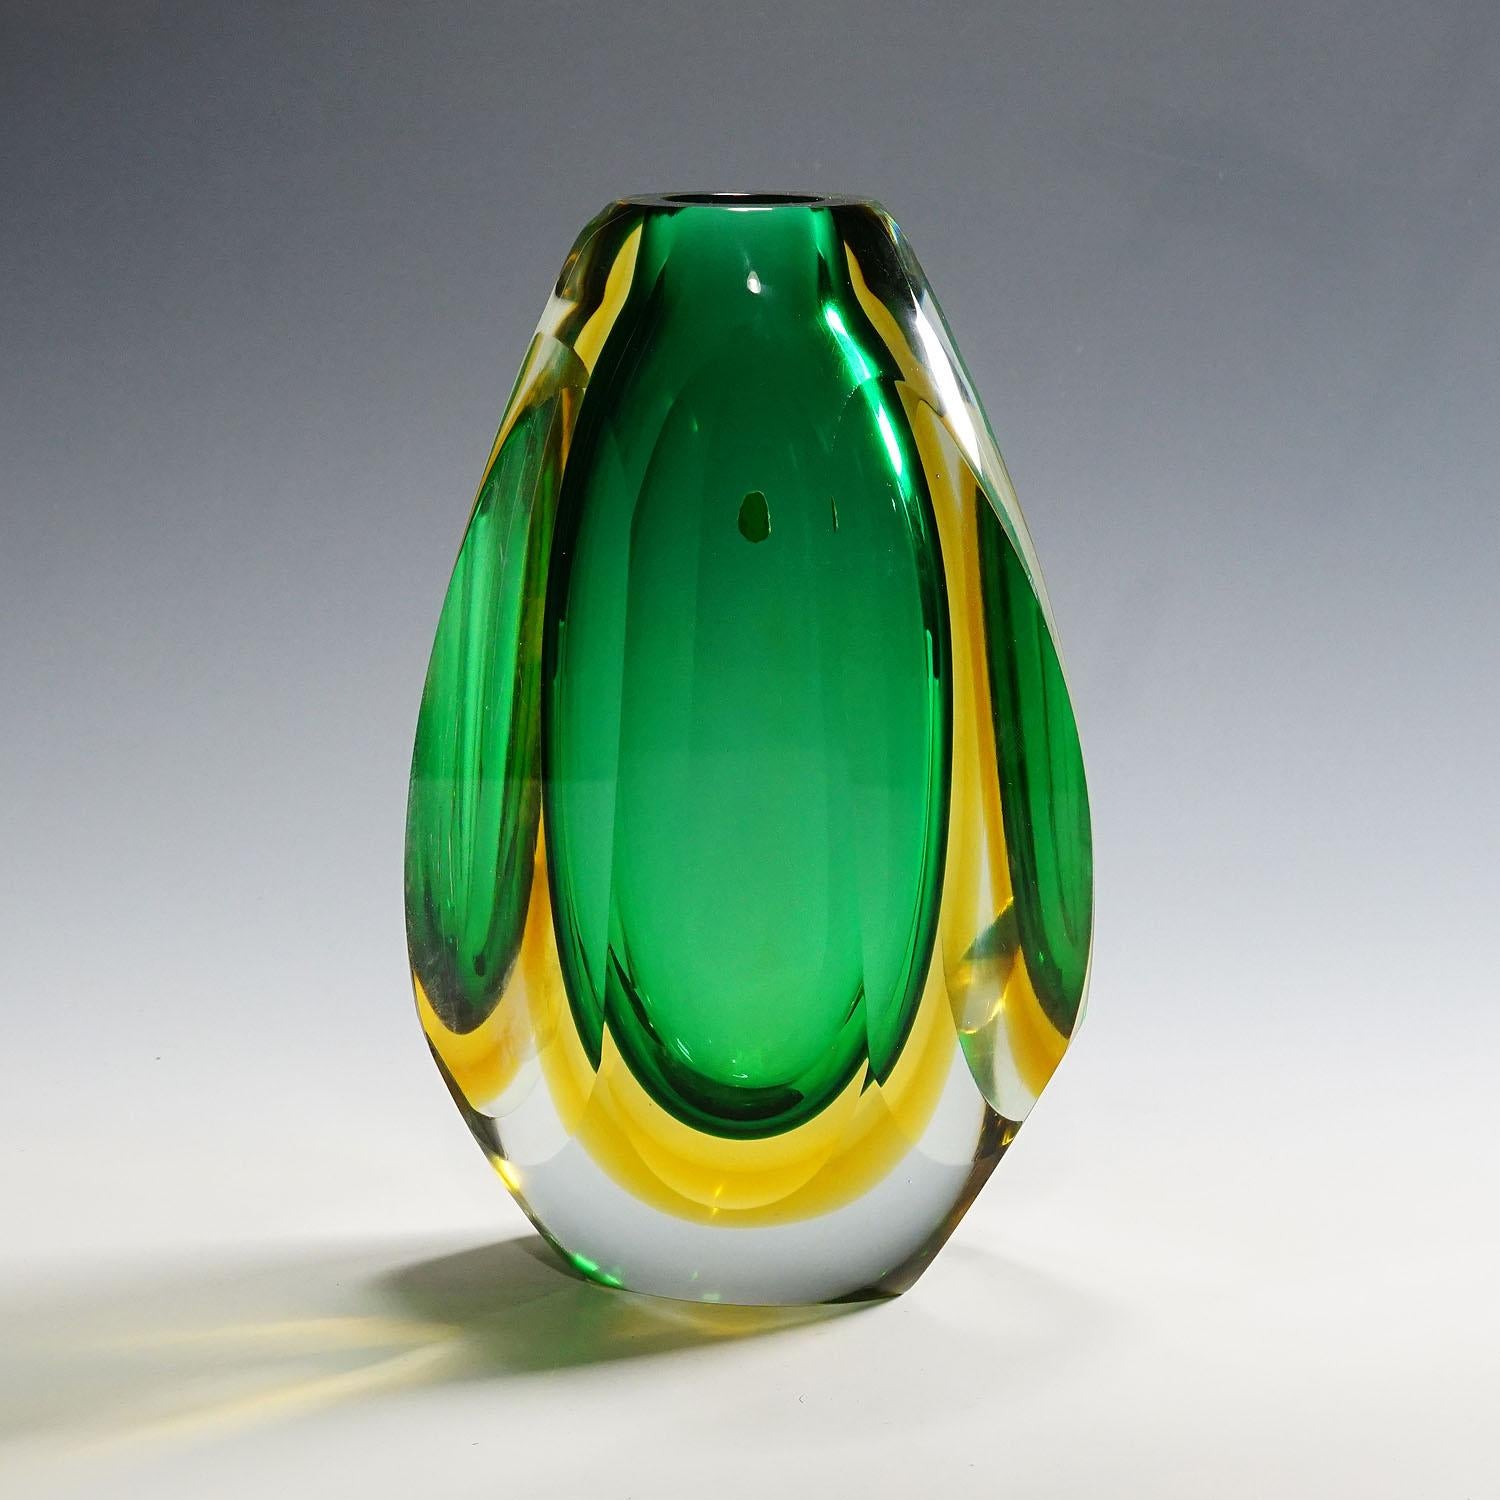 Midcentury Modern Murano Sommerso Art glass vase 1960s

A large and heavy Murano Sommerso glass vase most probably manufactured by Seguso Vetri d'Arte circa 1960s. Manufactured in green and yellow glass with a thick clear glass overlay. Each side